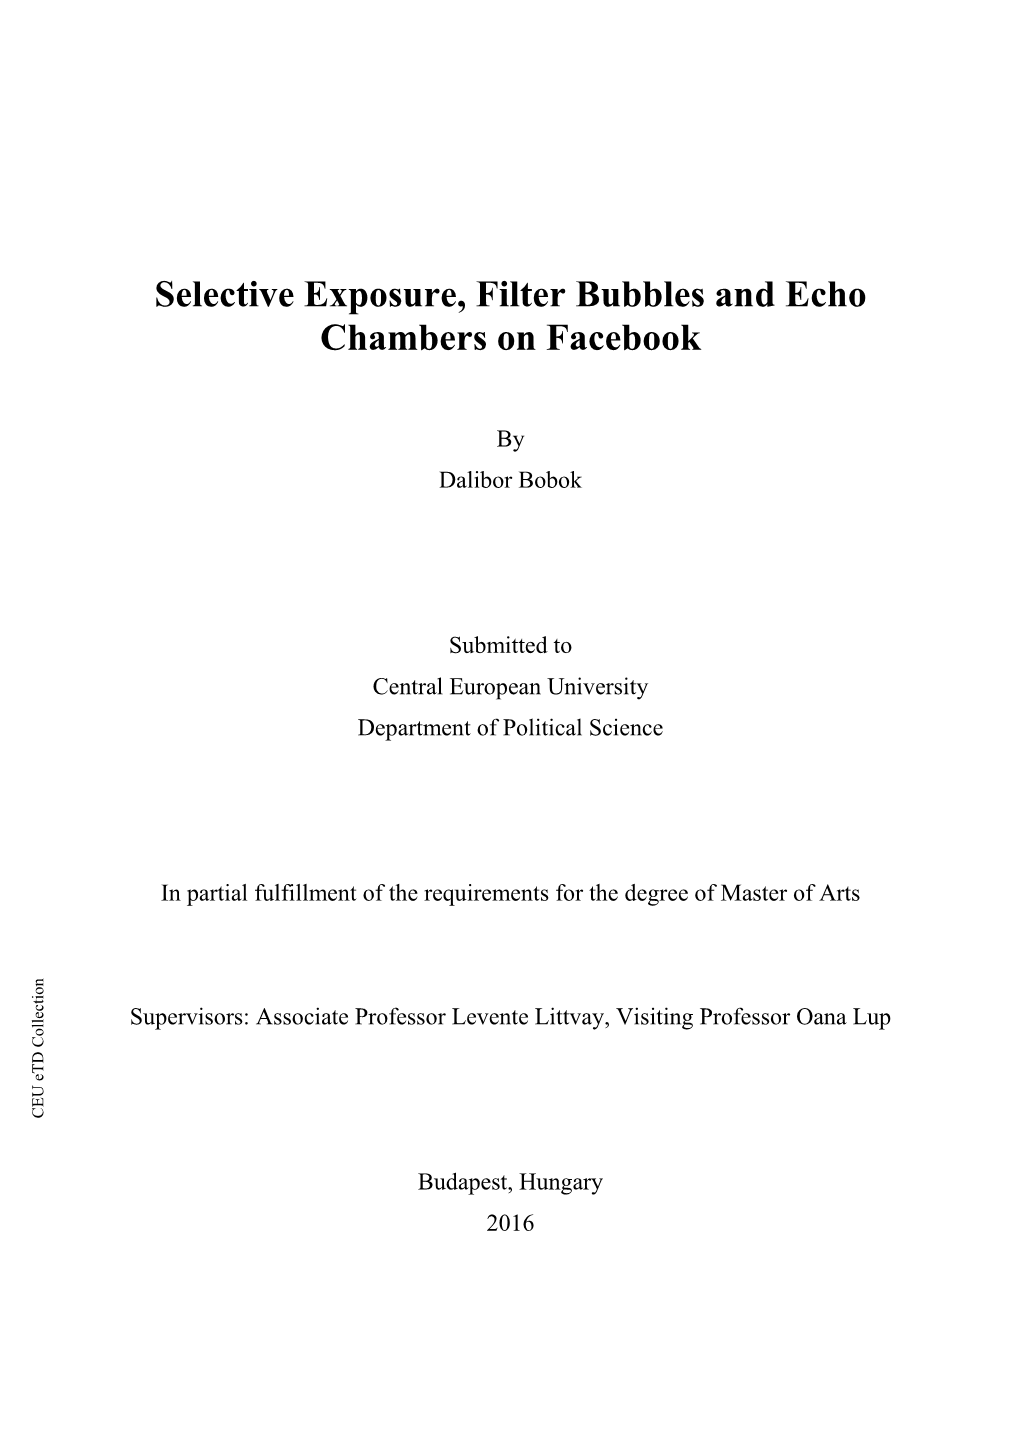 Selective Exposure, Filter Bubbles and Echo Chambers on Facebook